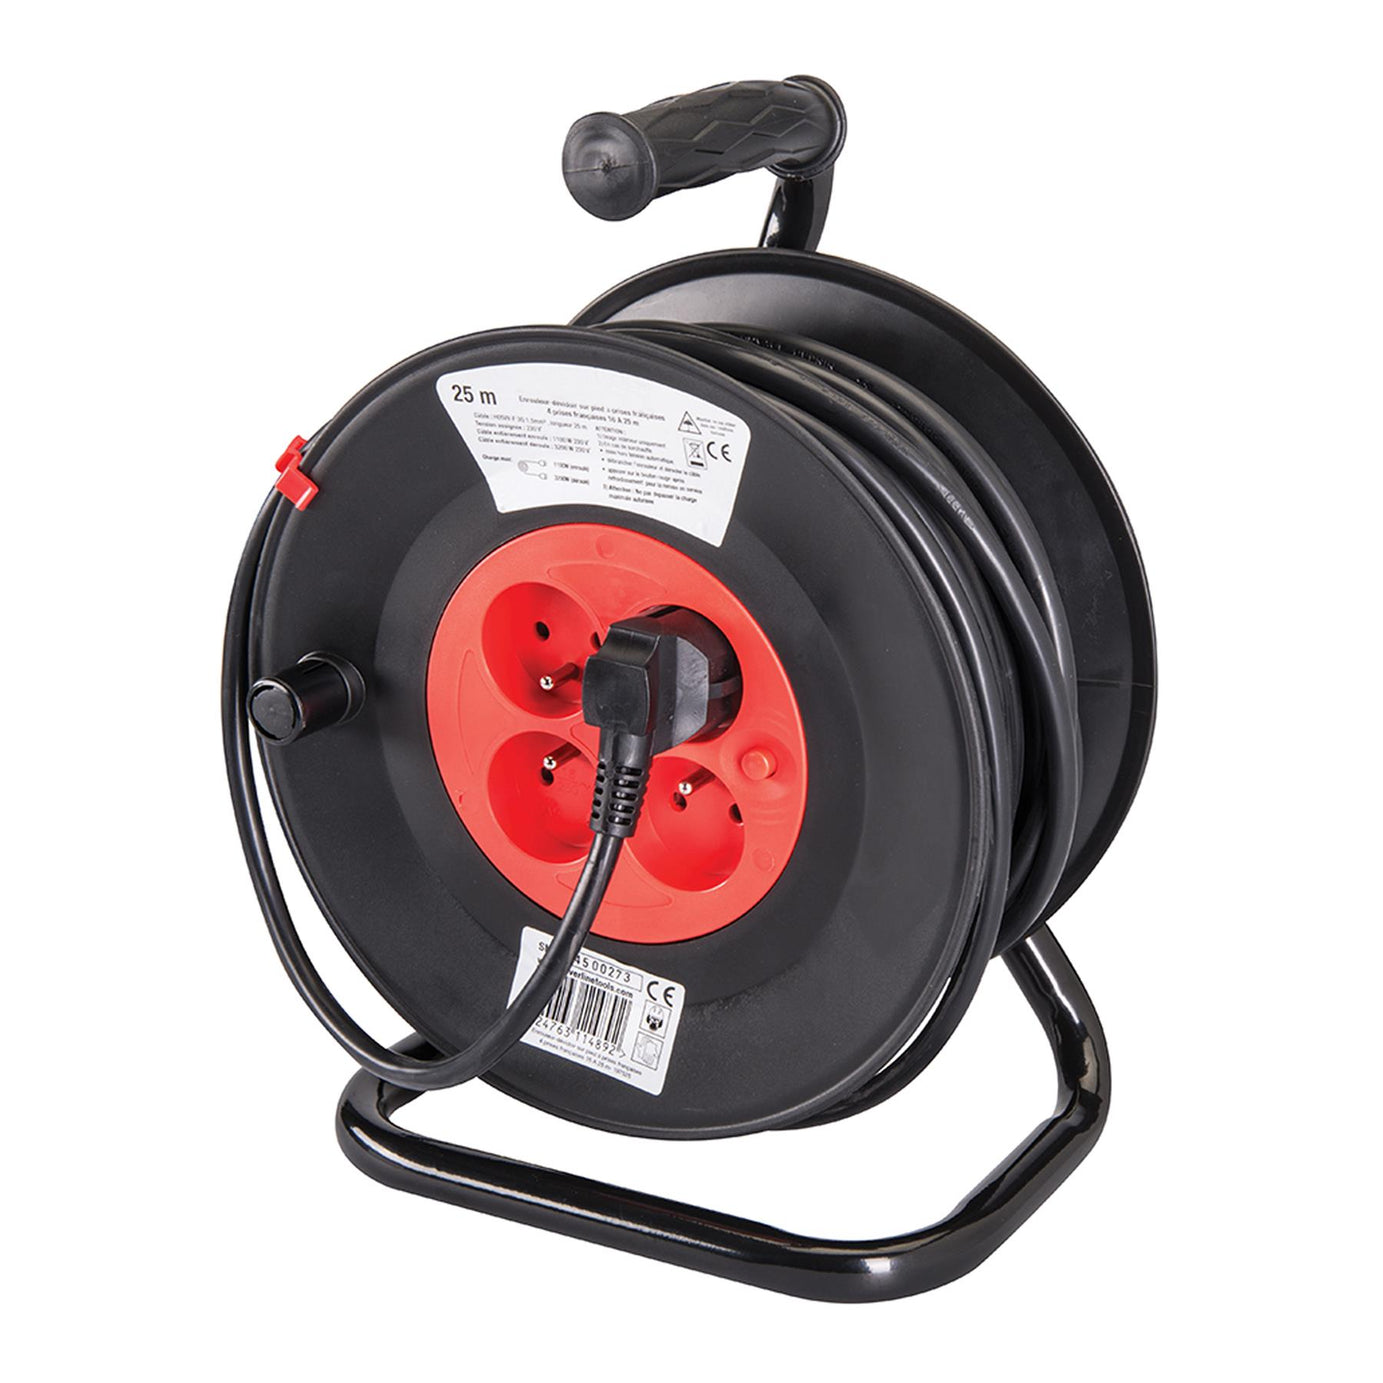 230V French Type E Cable Reel - European Freestanding 16A 25M 25M Long